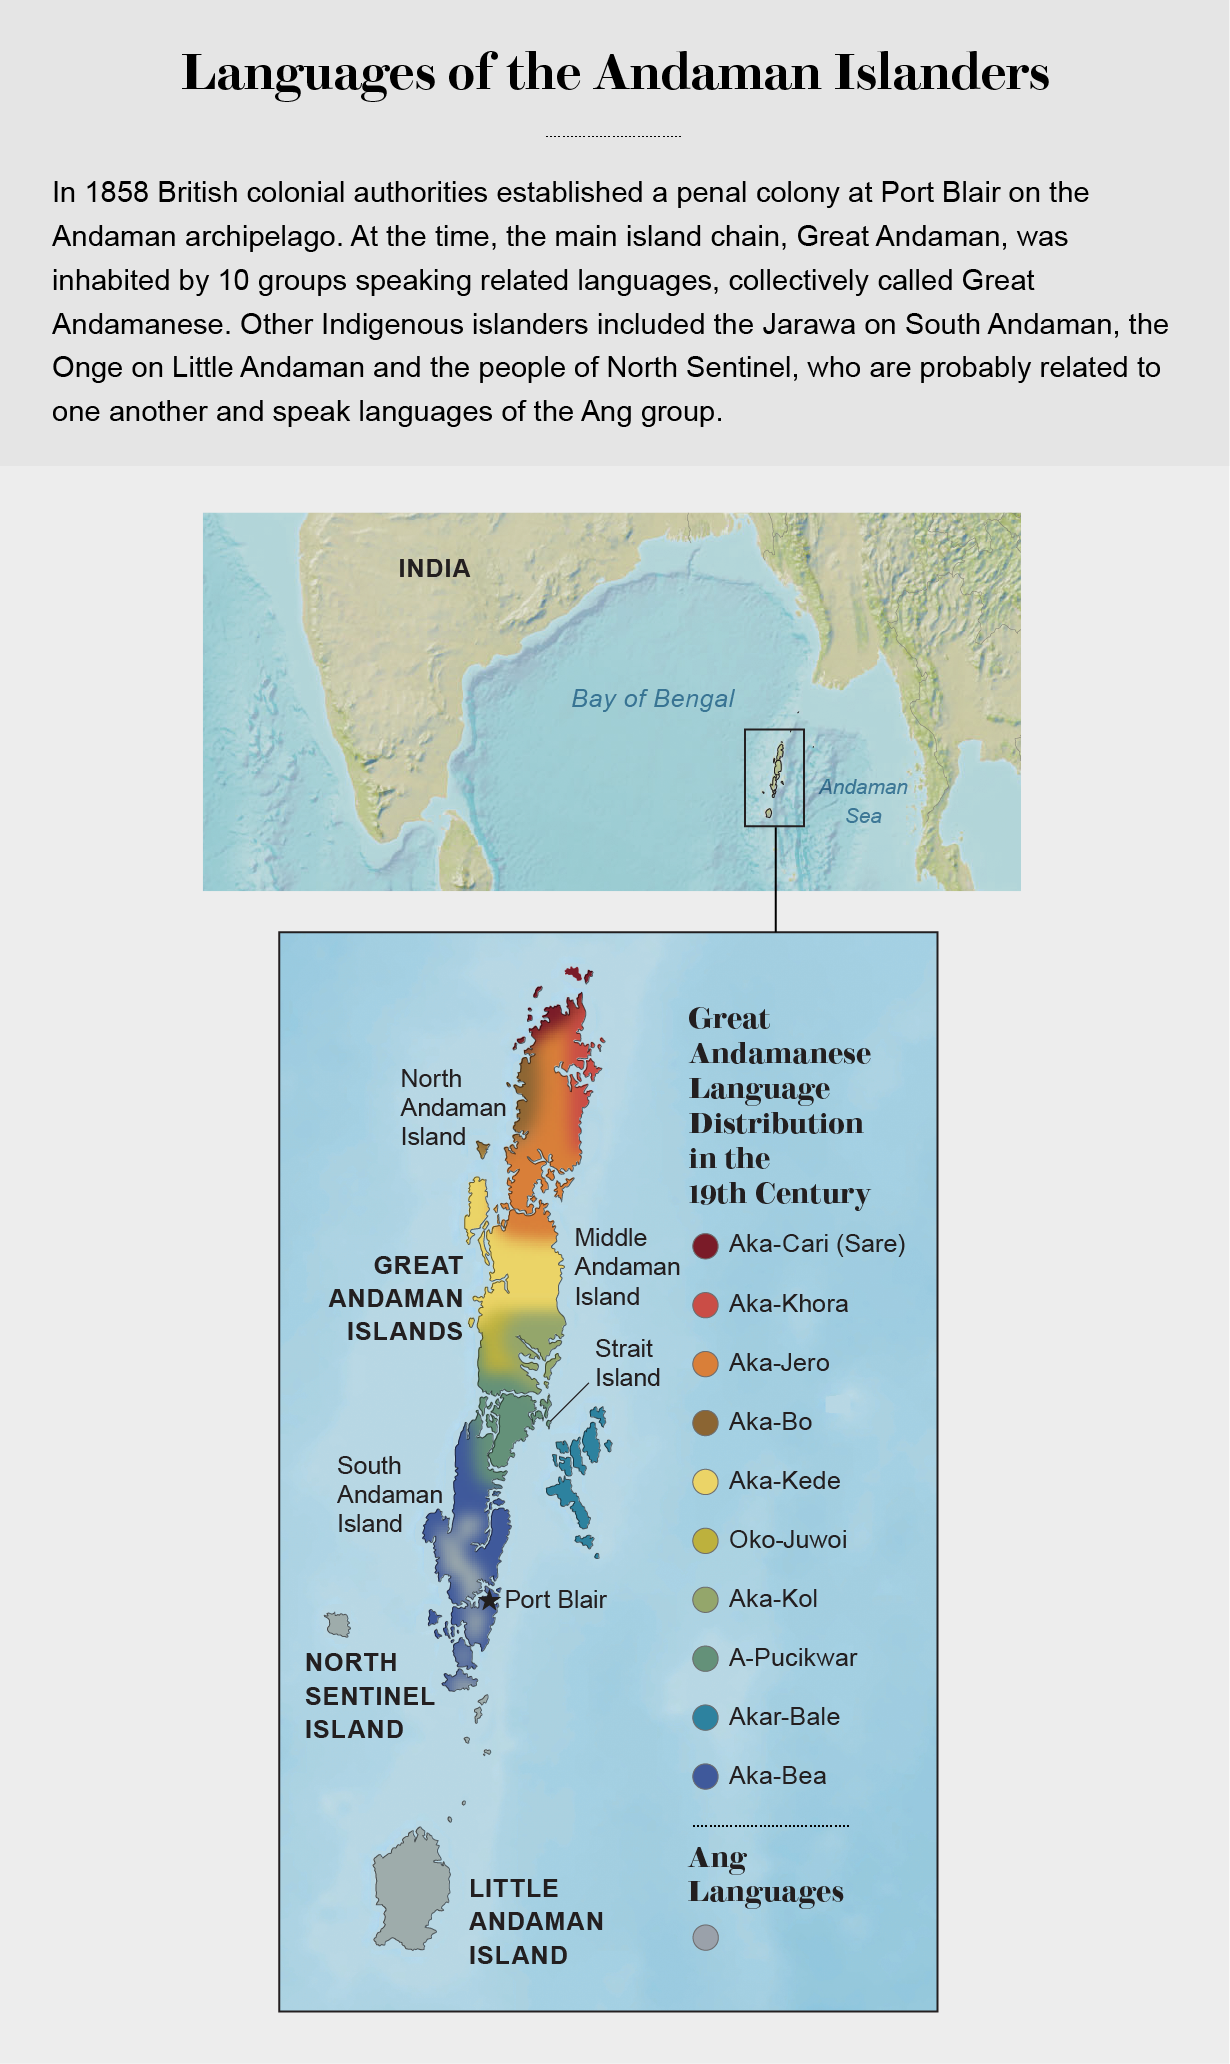 Color-coded map shows distribution of Great Andamanese and Ang languages on Great Andaman, North Sentinel and Little Andaman Islands.